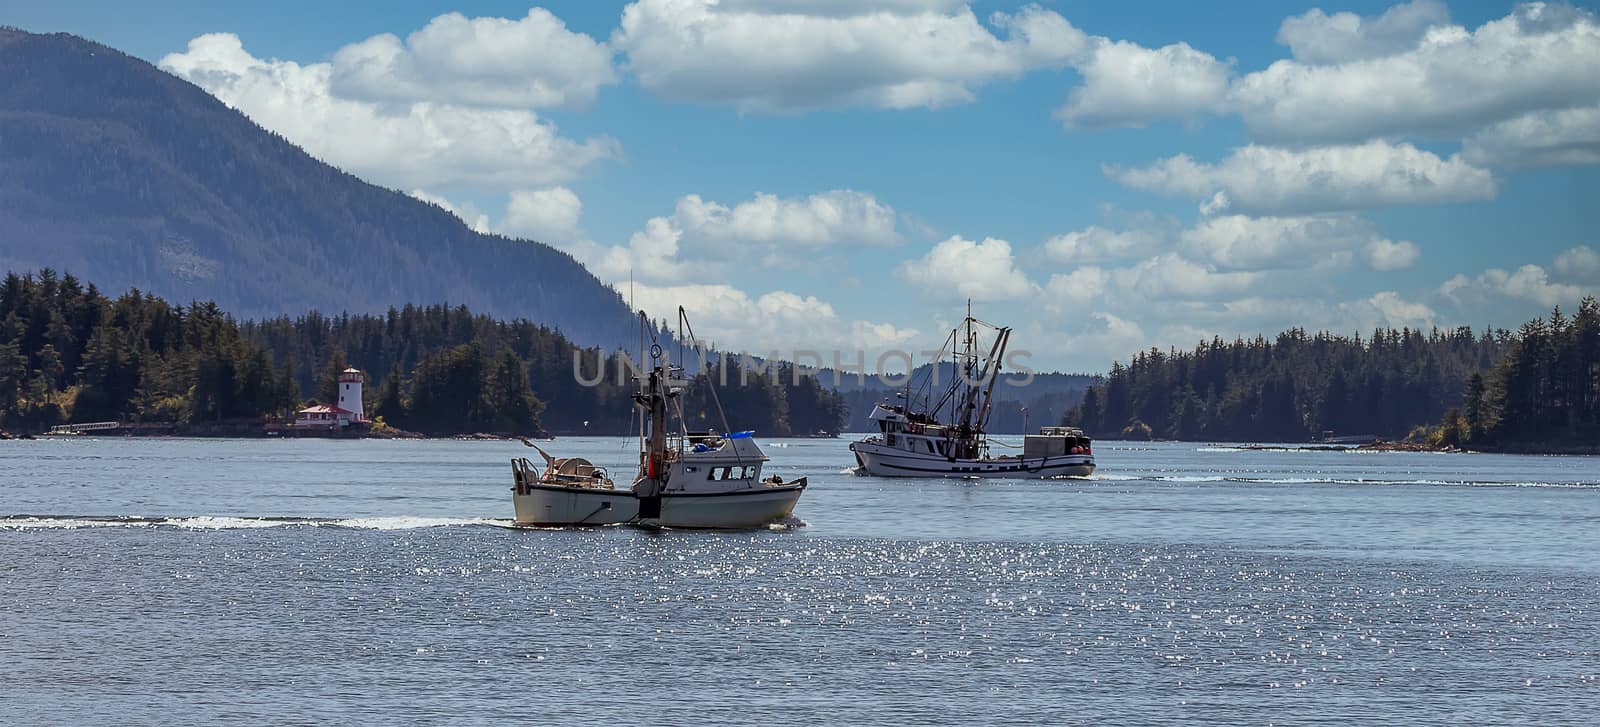 Shot of commercial fishing boats sailing in a harbour in Sitka, AK. Green forest, mountains, beautiful blue sky with clouds, and a lighthouse in the background.